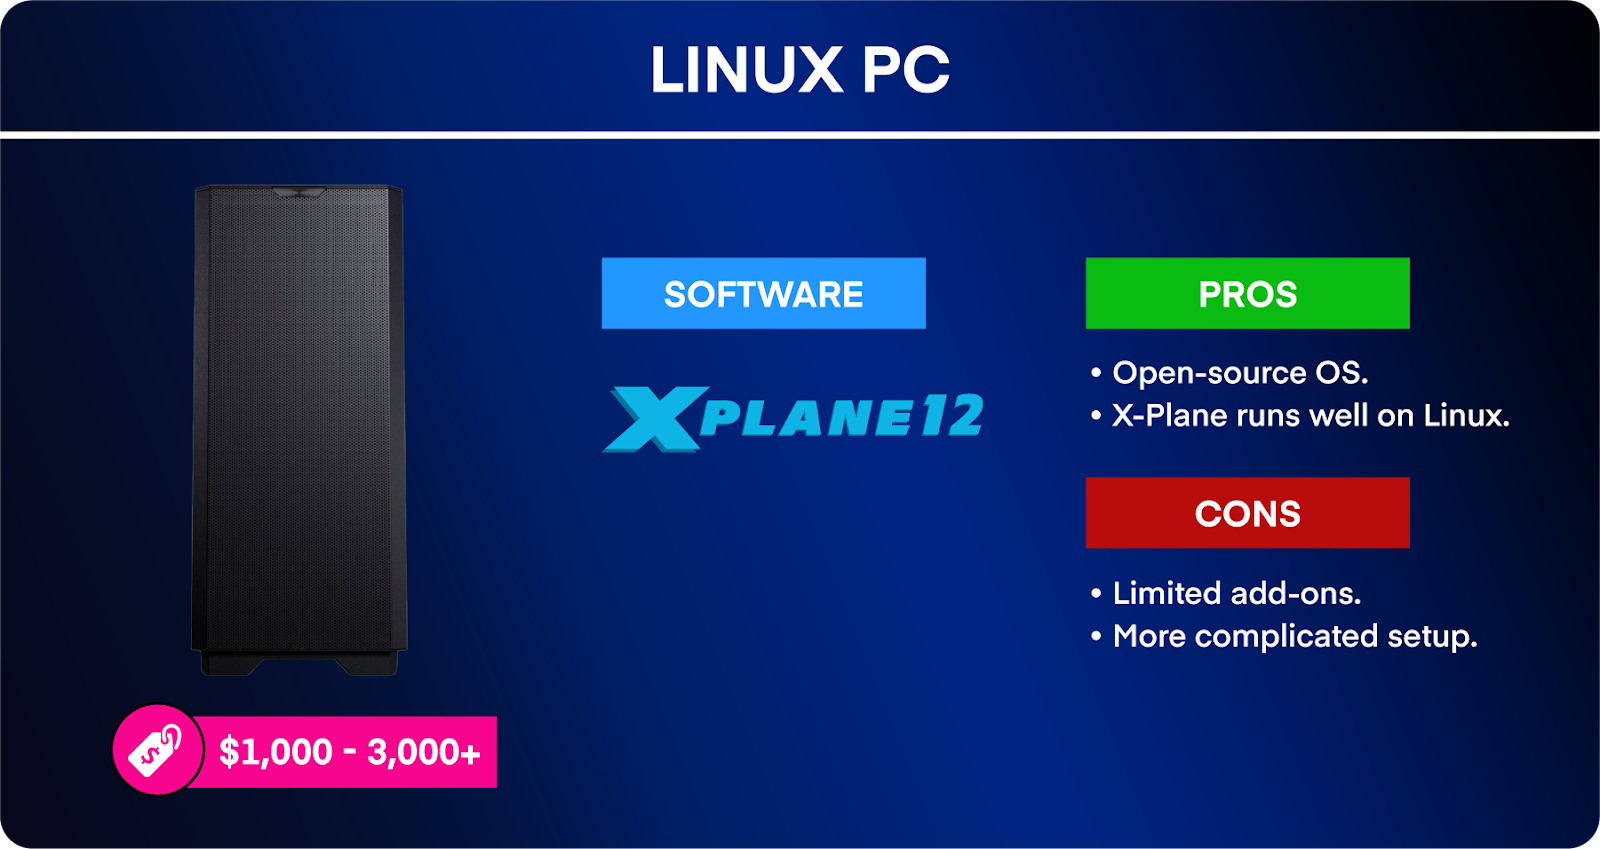 Linux PC infographic, listing sim software, price range, pros, and cons.